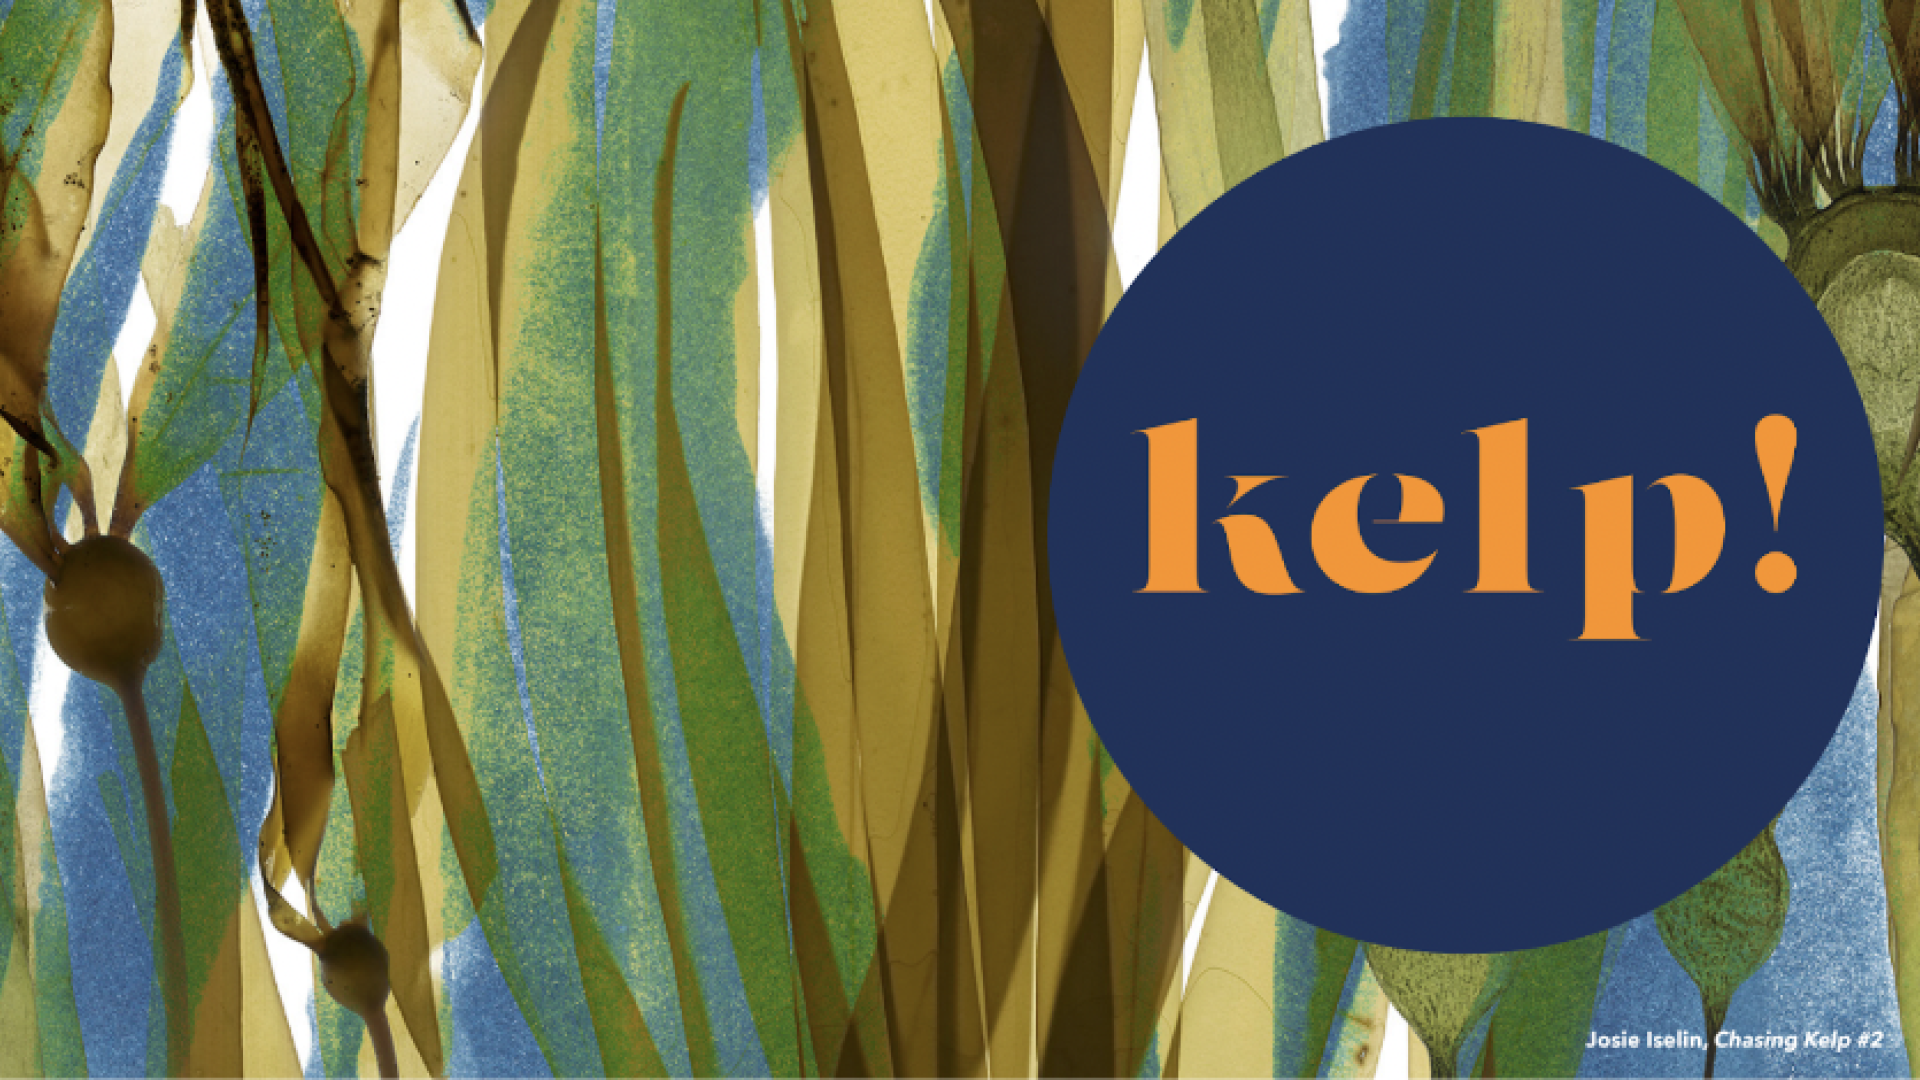 Bull kelp layered on a blue and white background. A blue circle with ochre font that says "kelp!"